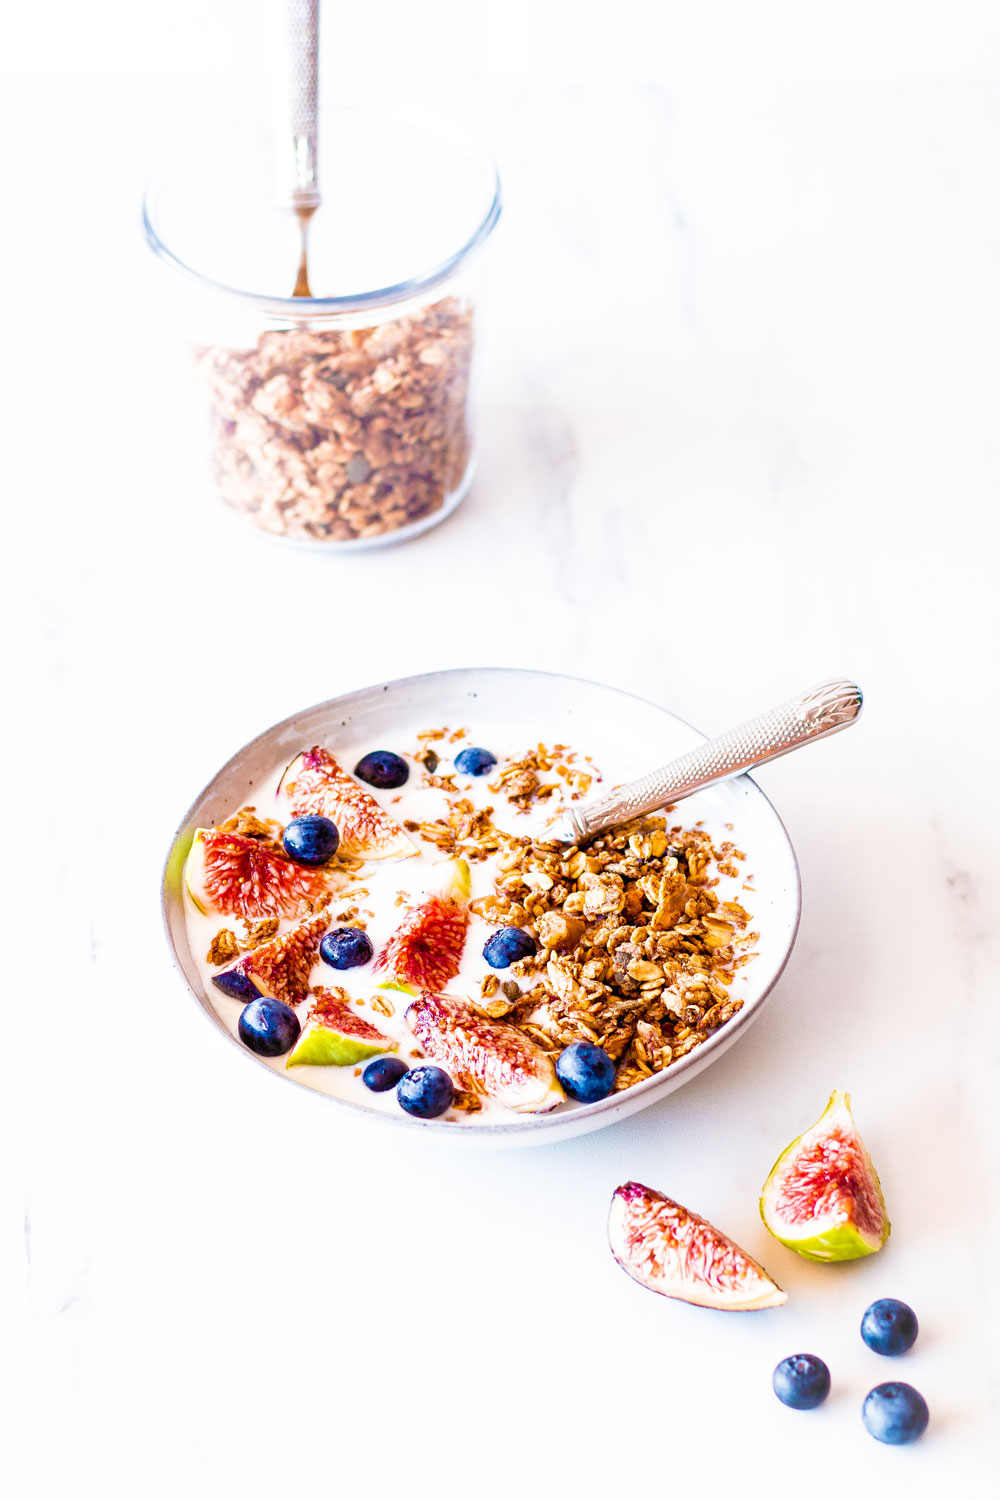 If staying healthy and fit is at the top of your priority list, then you need to give this Date-sweetened Nut & Seed Granola recipe a try! https://www.spotebi.com/recipes/date-sweetened-nut-seed-granola/